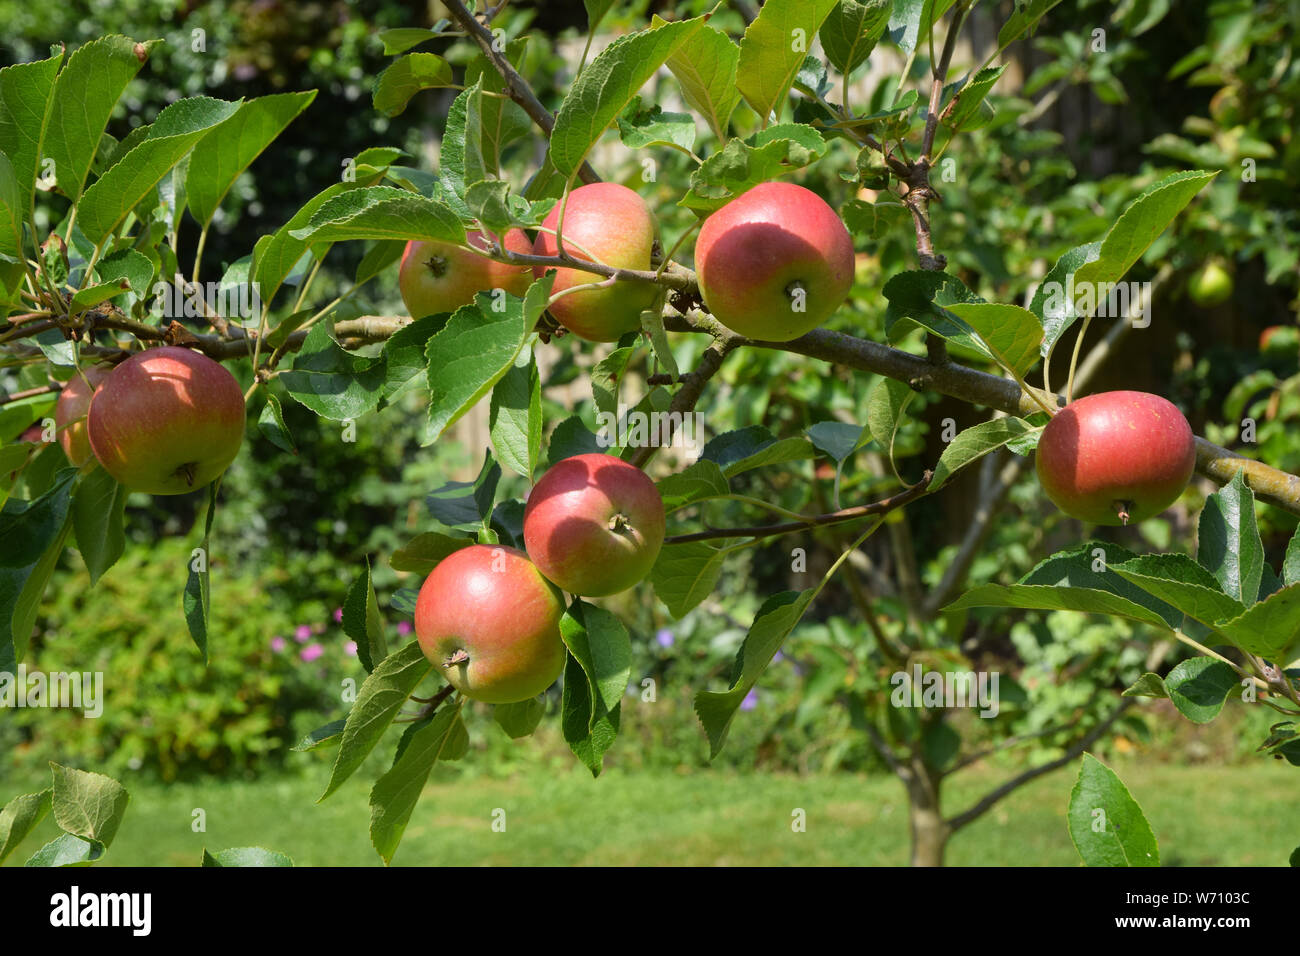 Eating apple, Malus domestica discovery Stock Photo